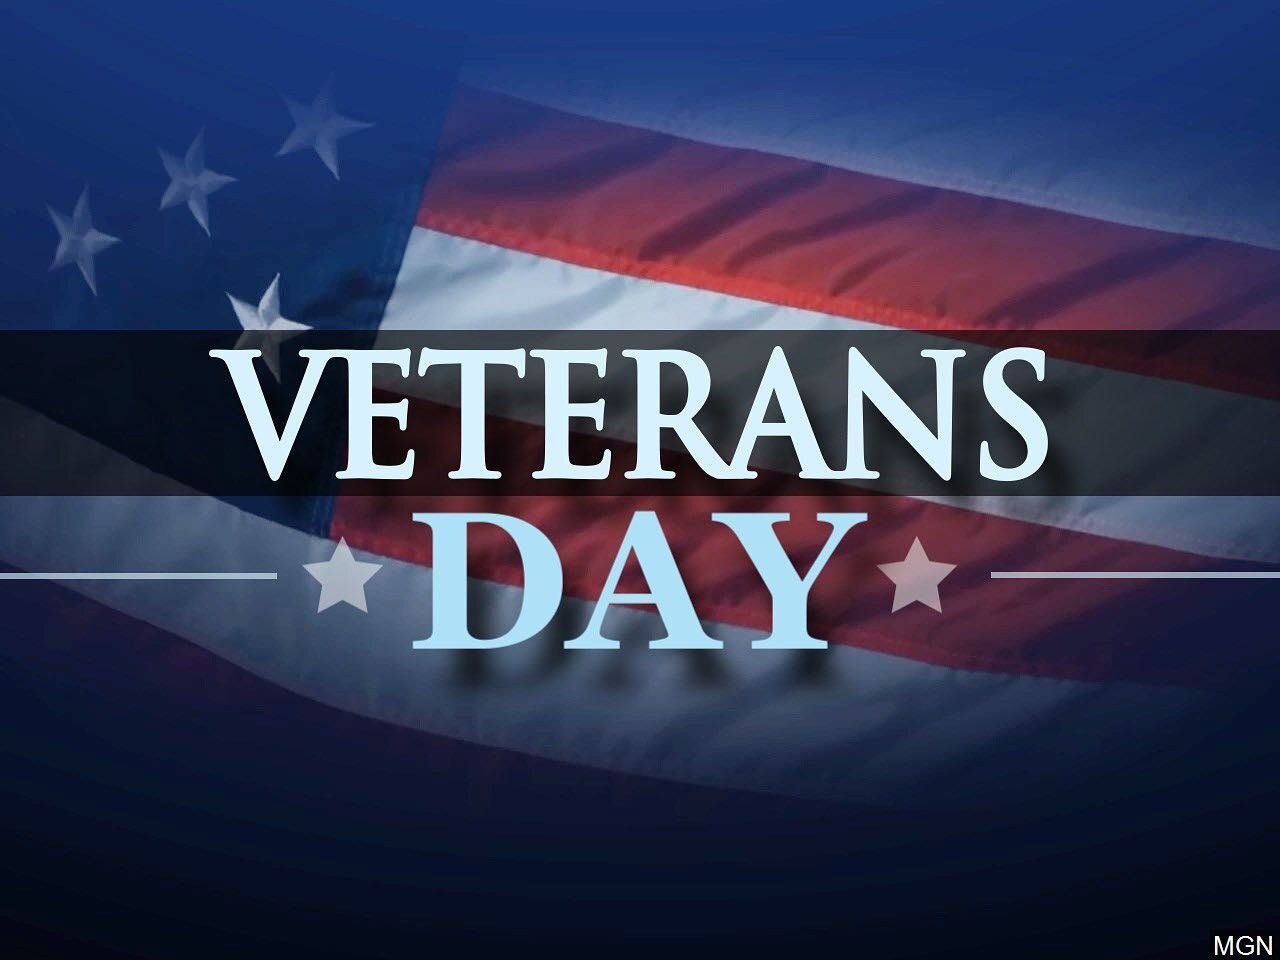 Thank you to all who served! 

#VeteransDay